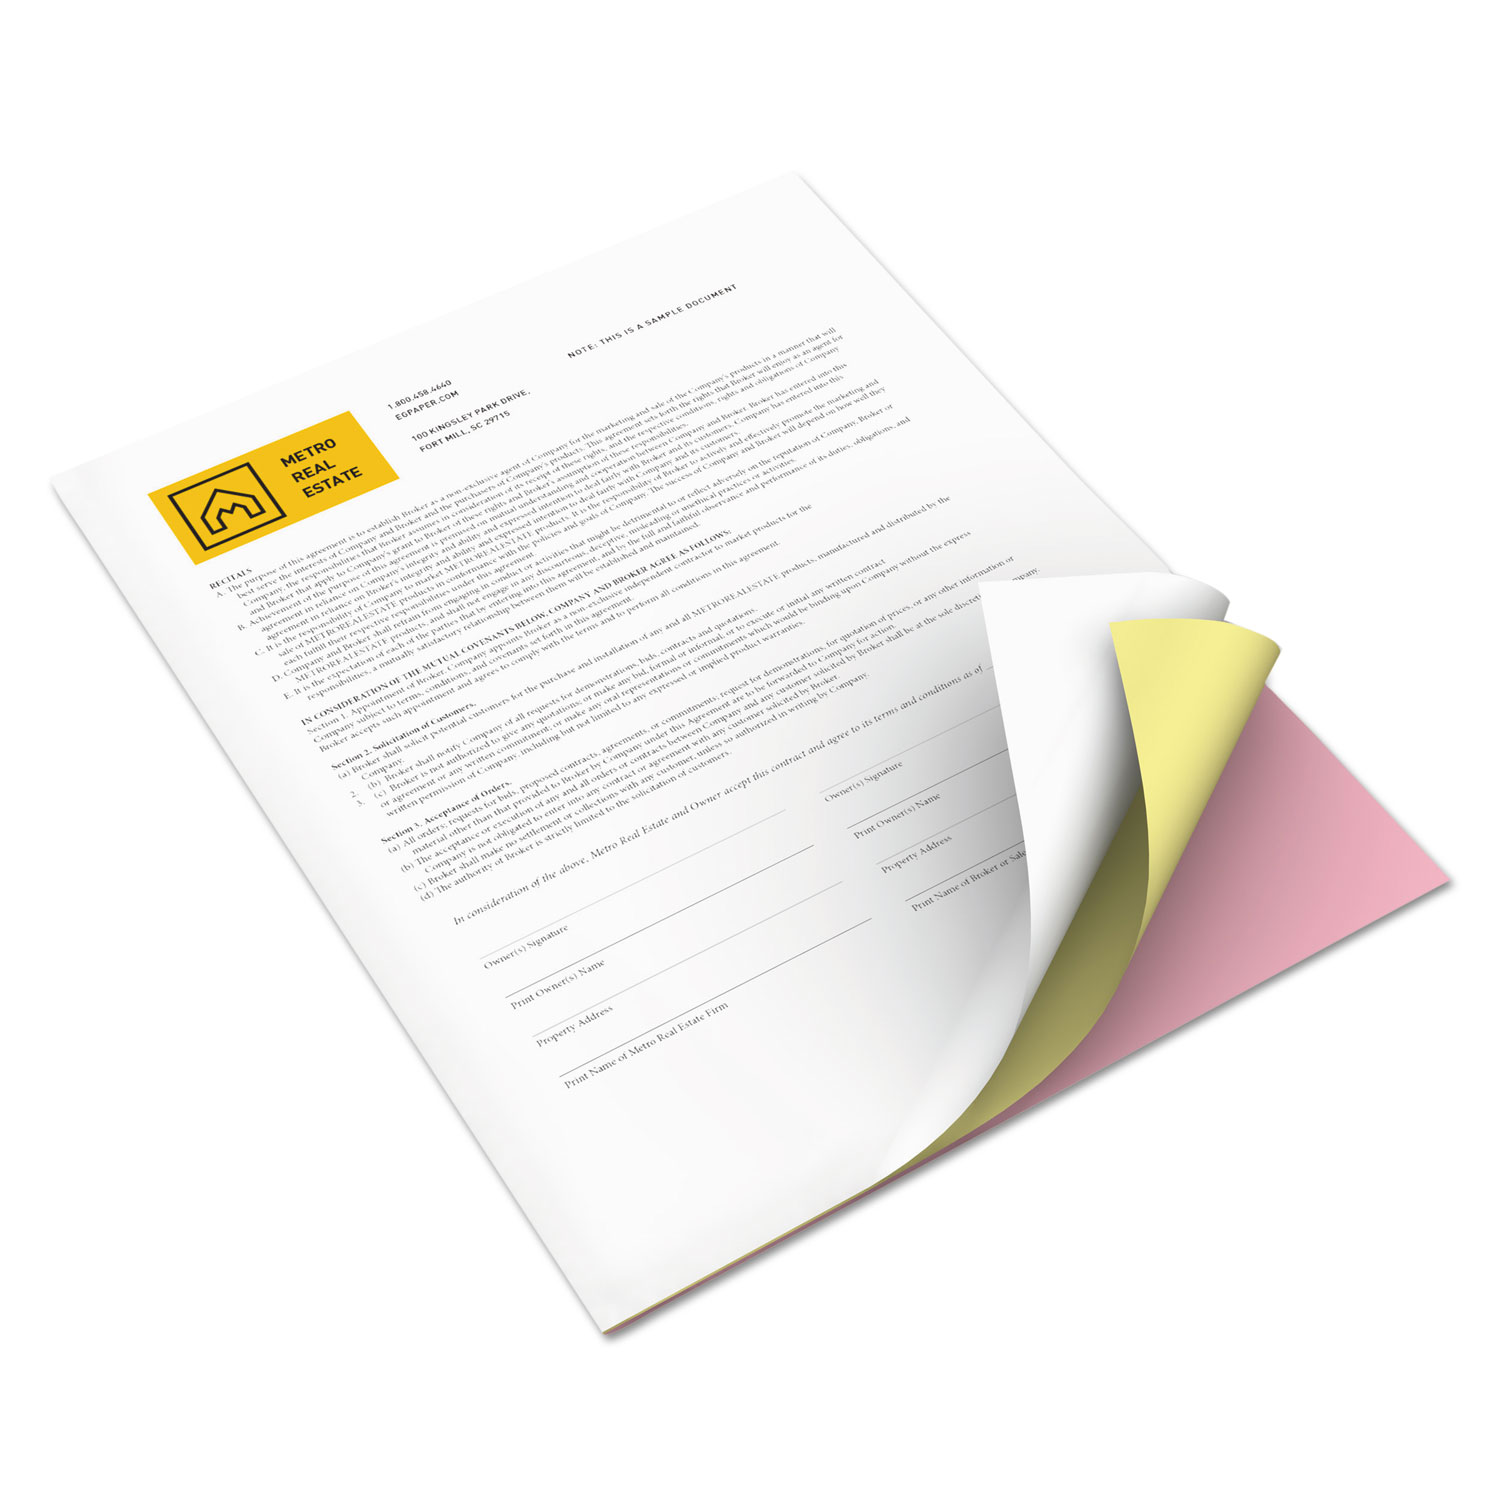  xerox 3R12426 Revolution Carbonless 3-Part Paper, 8.5 x 11, Canary/Pink/White, 2, 505/Carton (XER3R12426) 